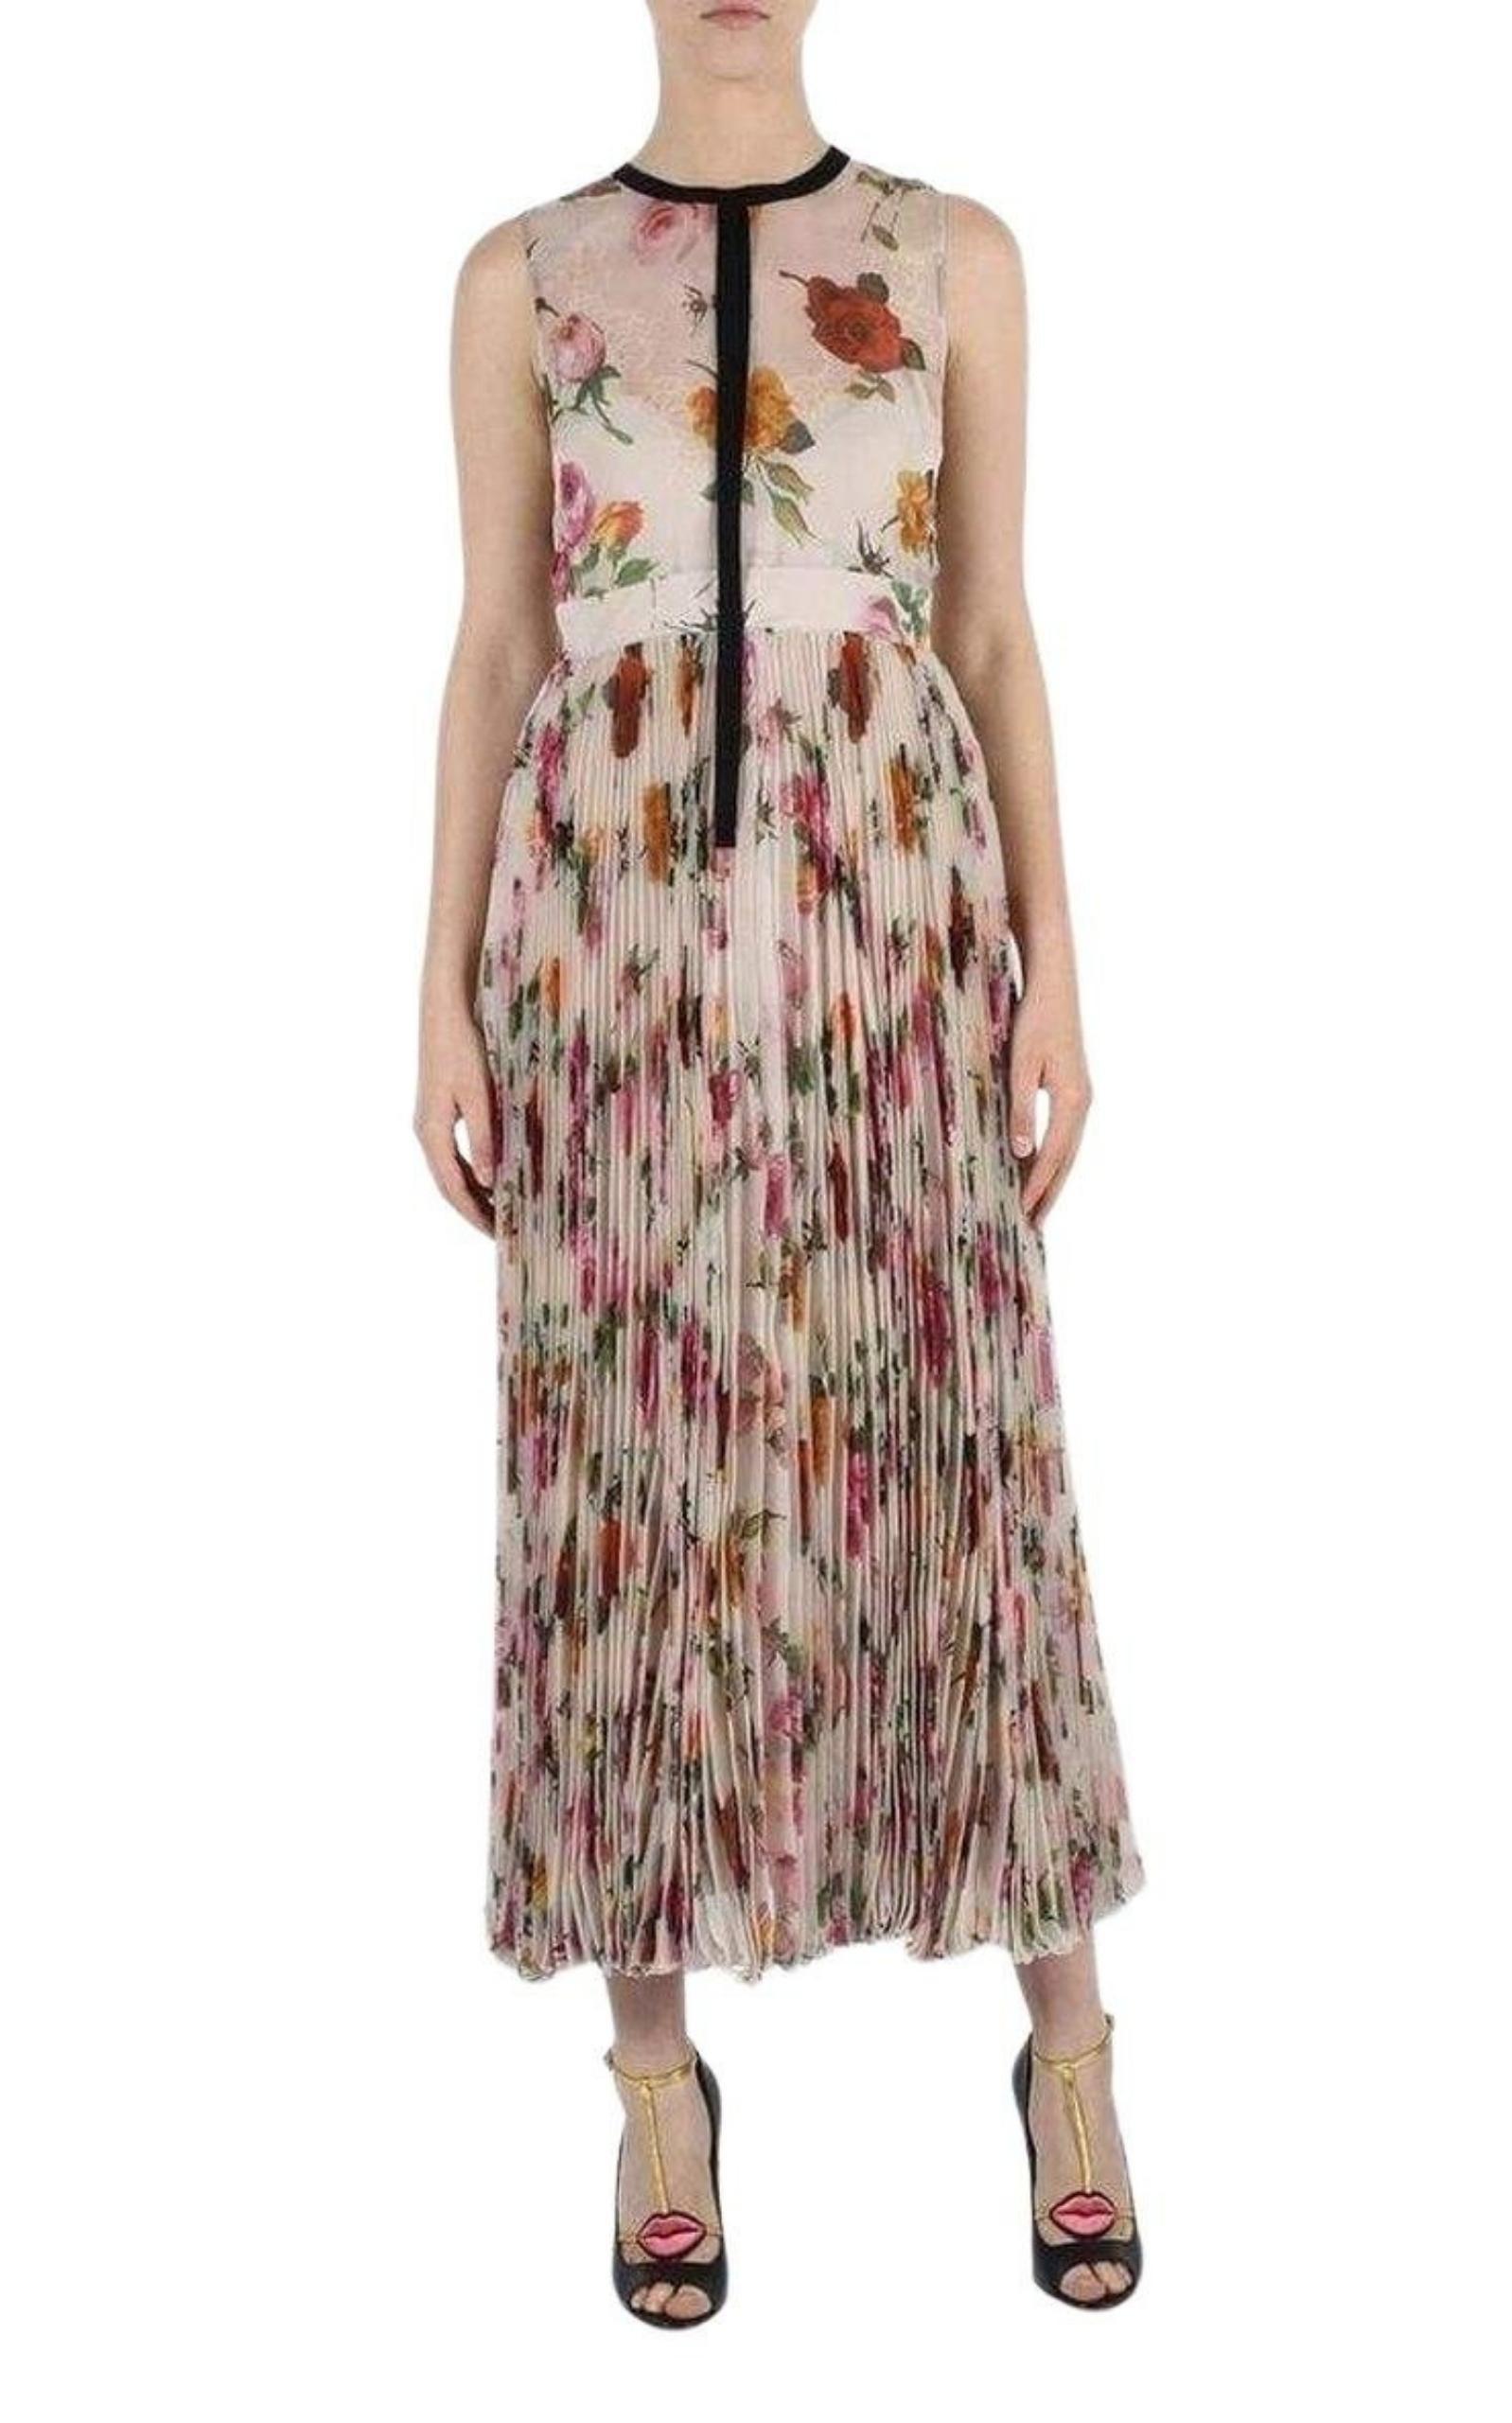  GucciFloral Patterned Pleated Silk Dress - Runway Catalog